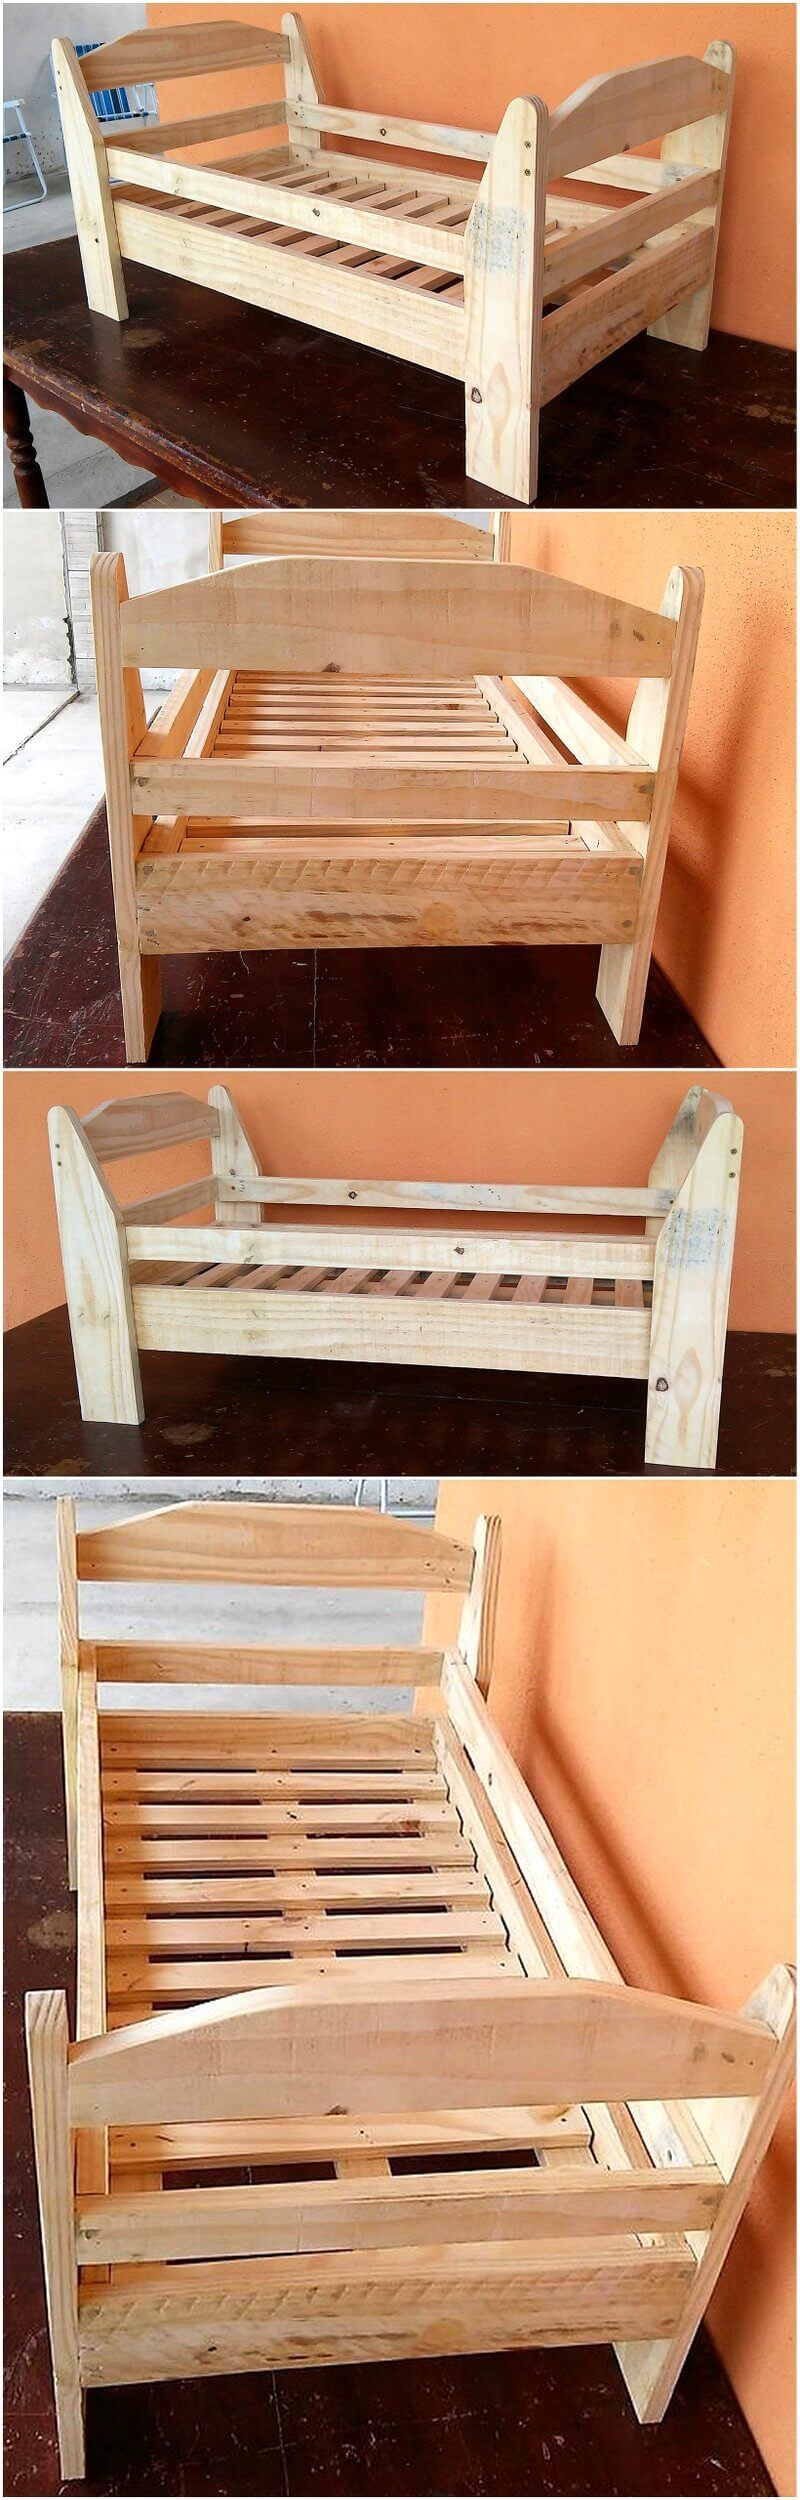 recycled pallets baby bed